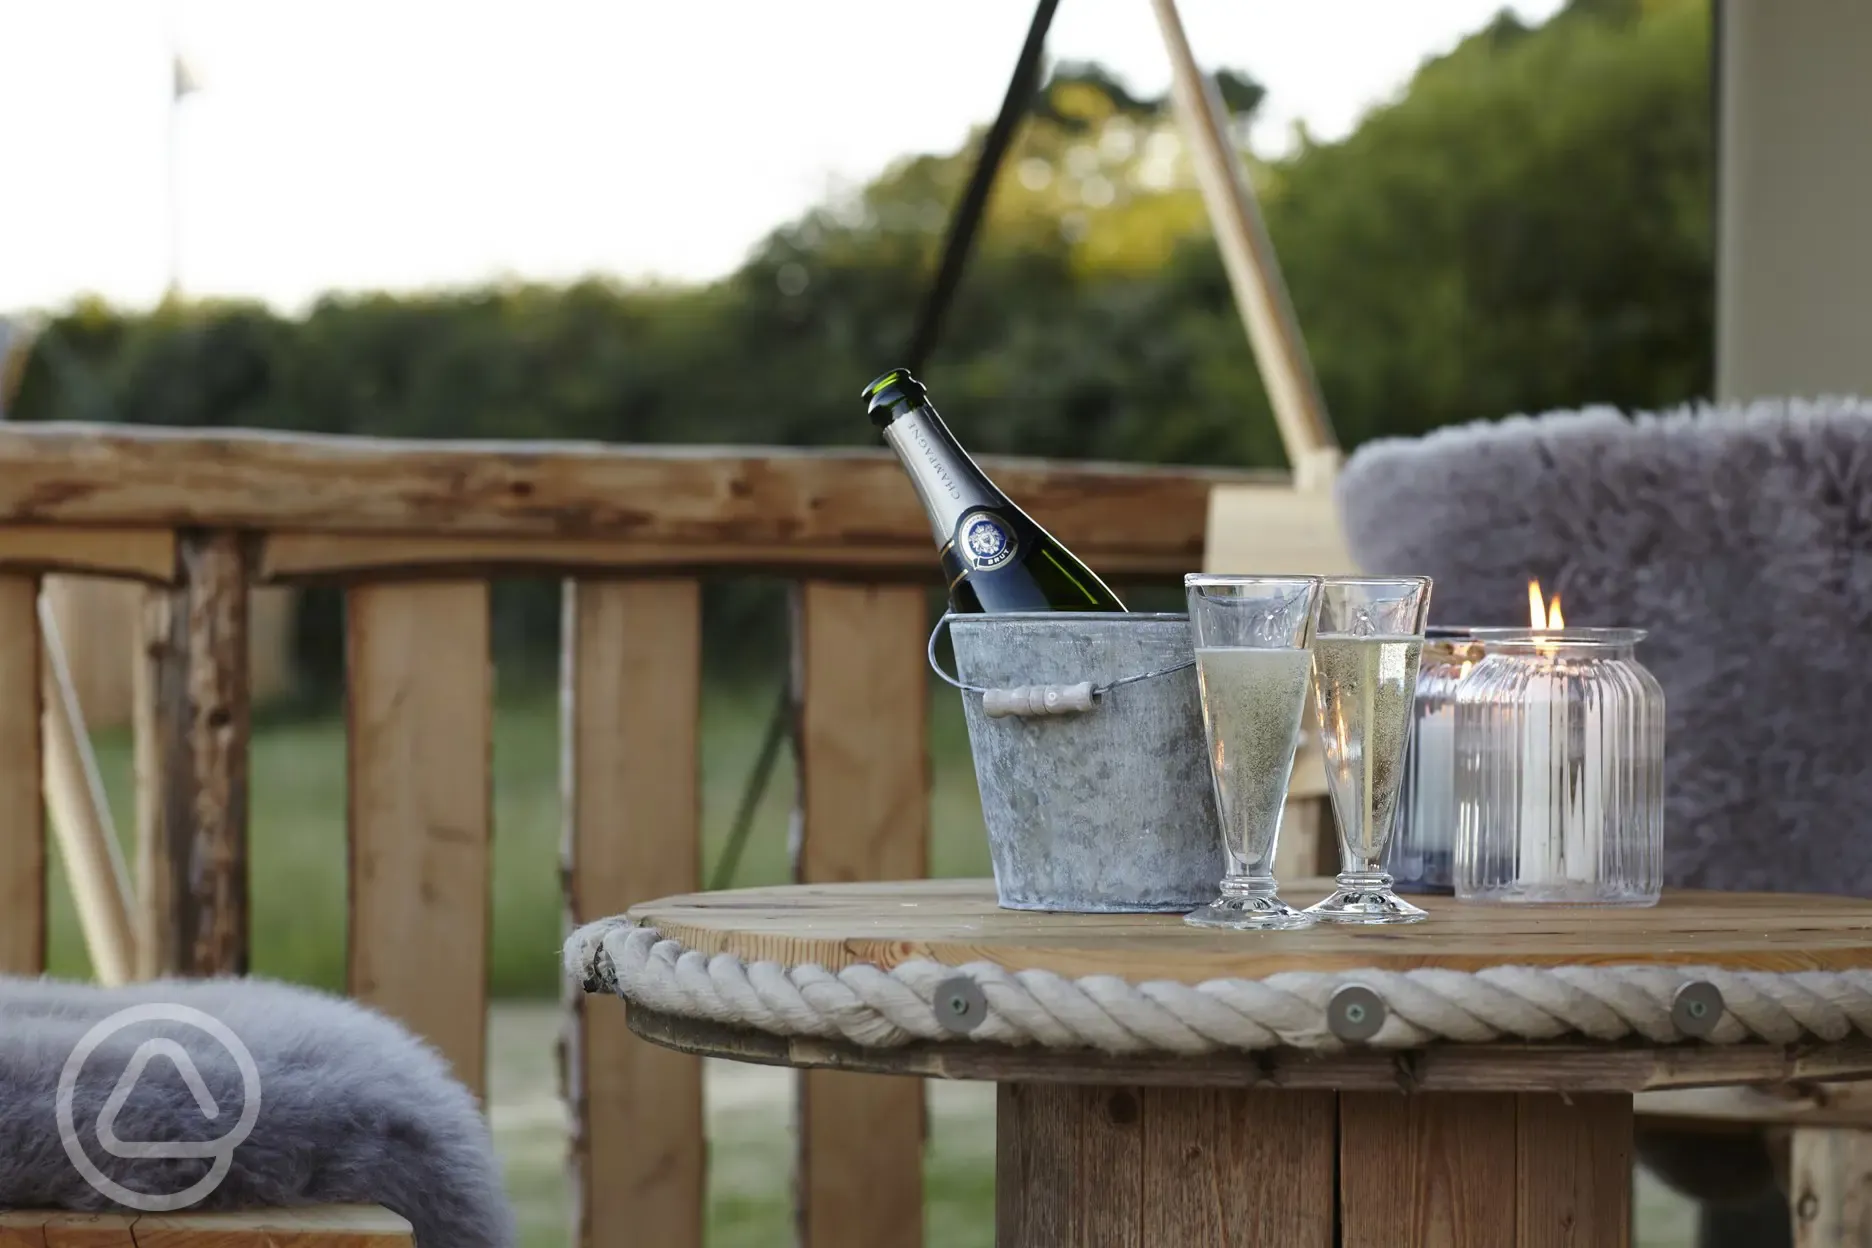 Bubbles and Blankets out in the fresh countryside air.